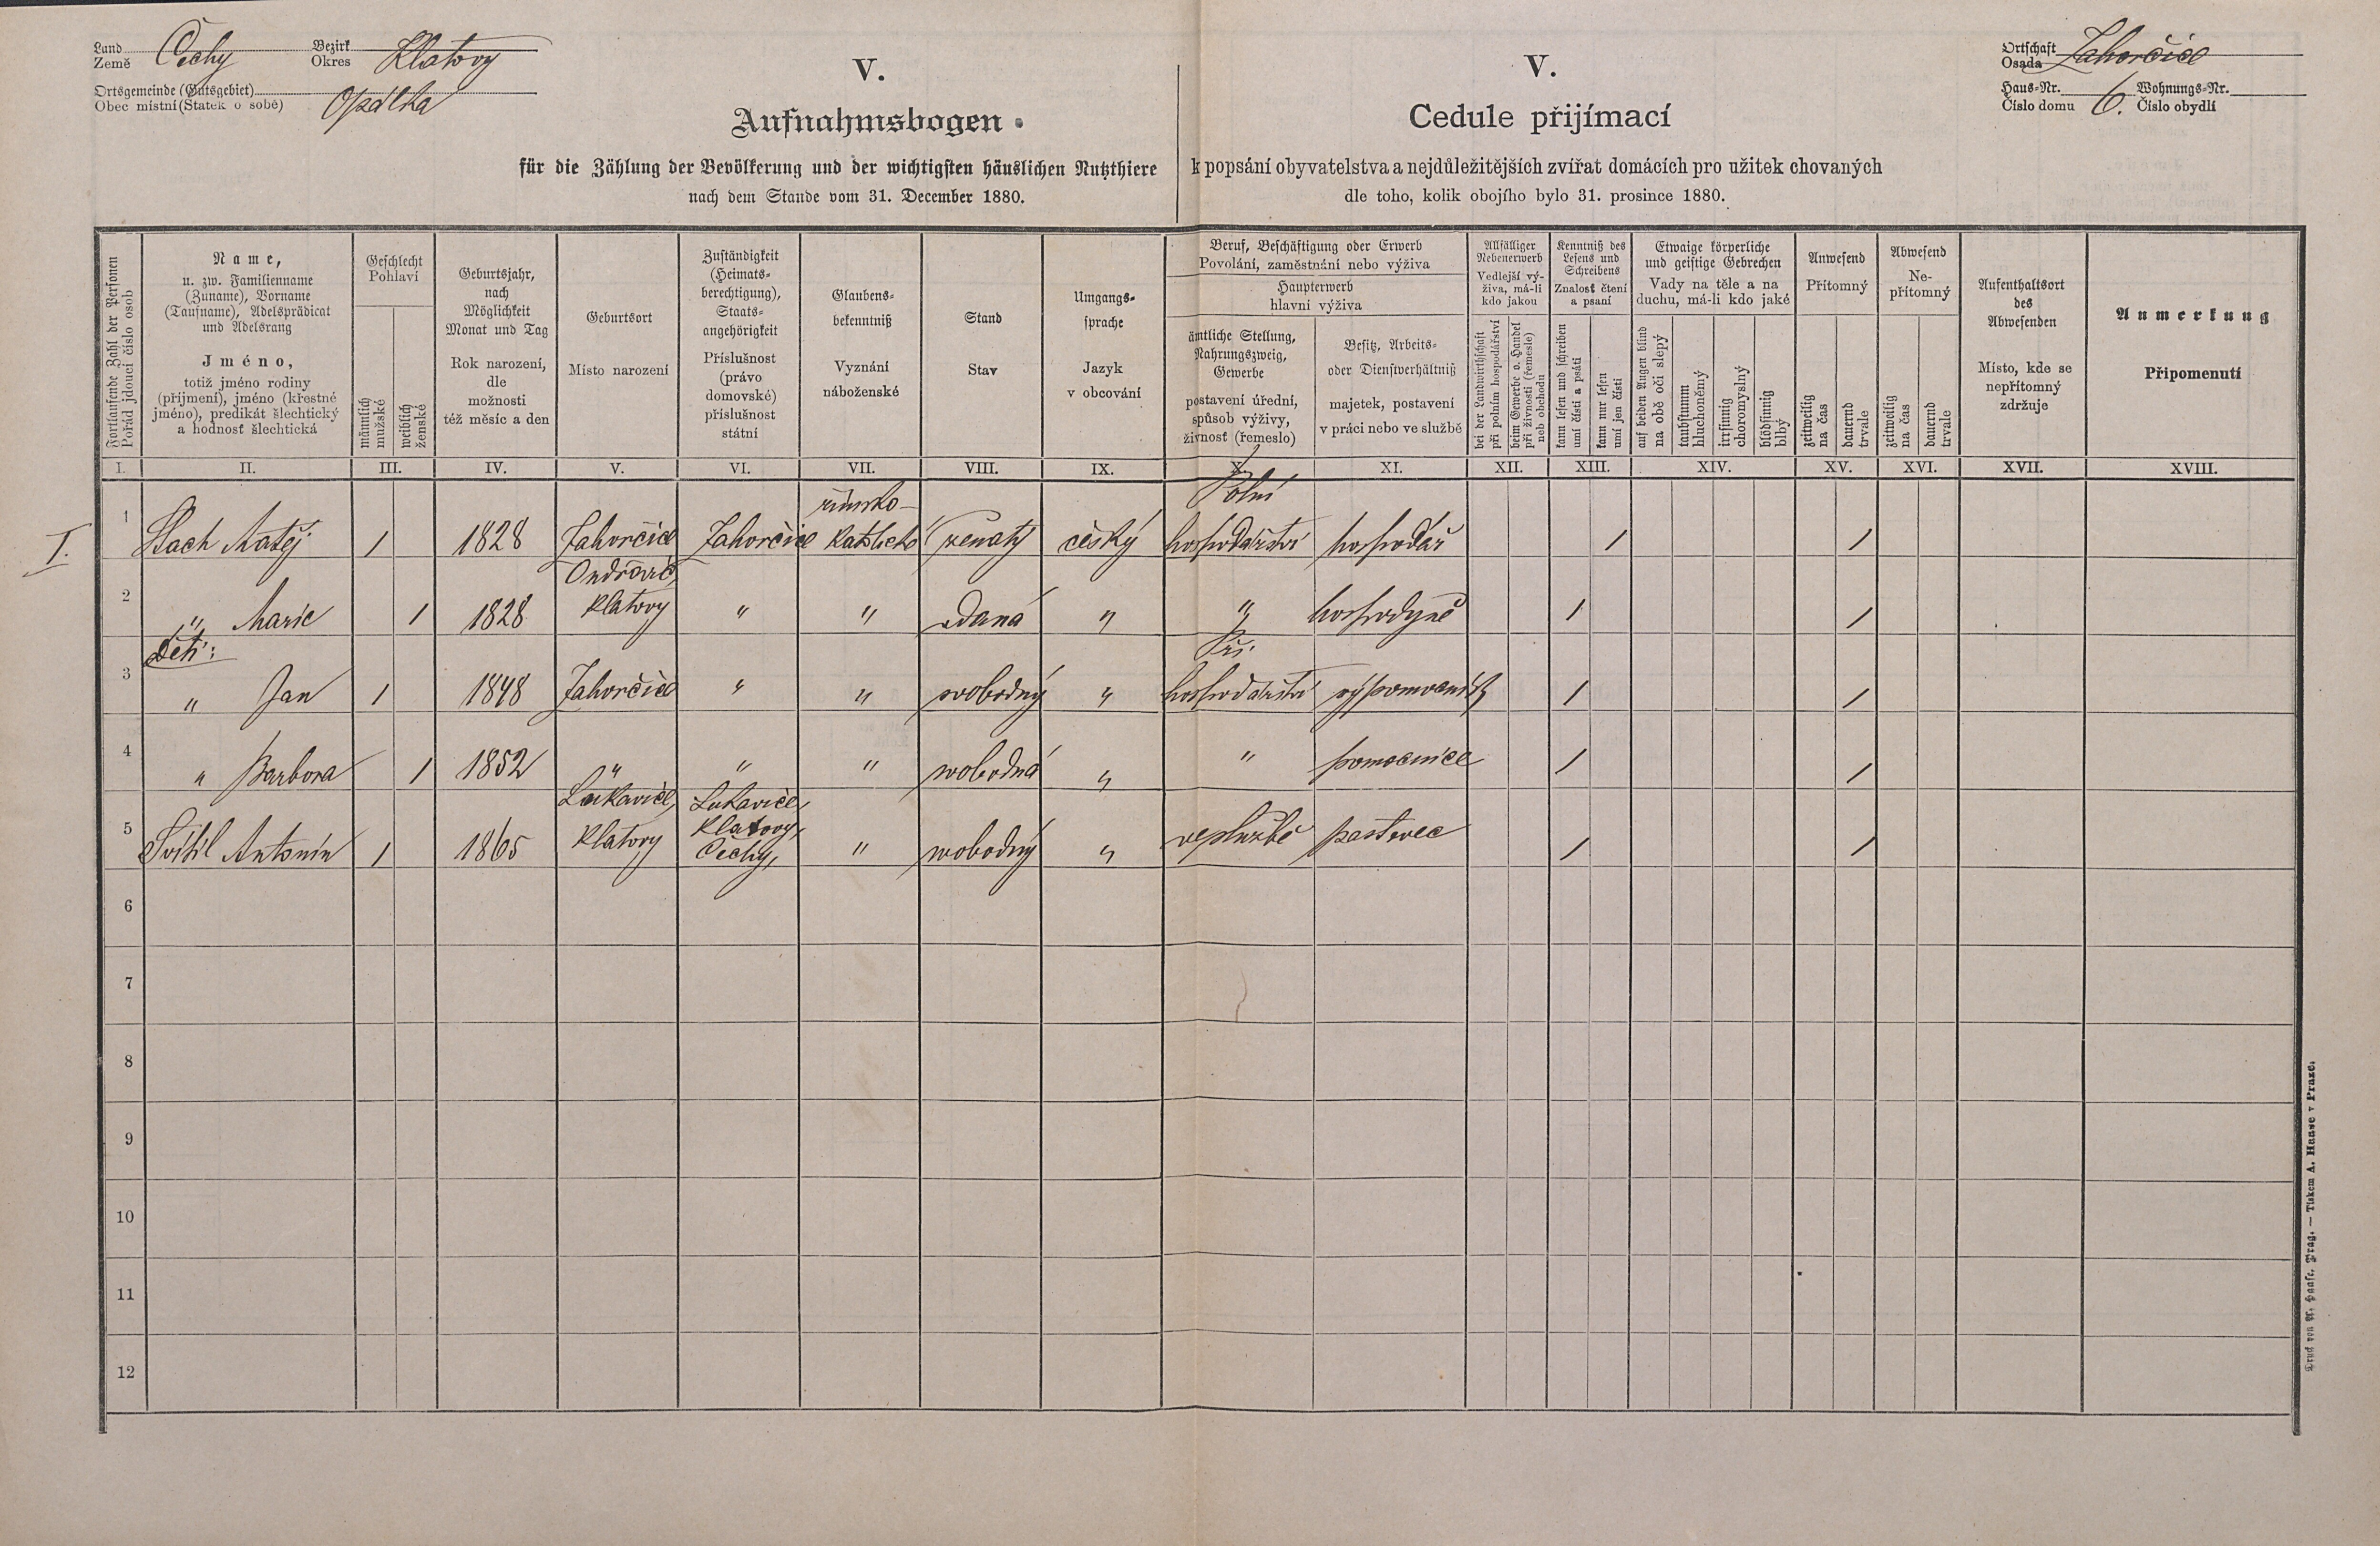 1. soap-kt_01159_census-1880-zahorcice-cp006_0010